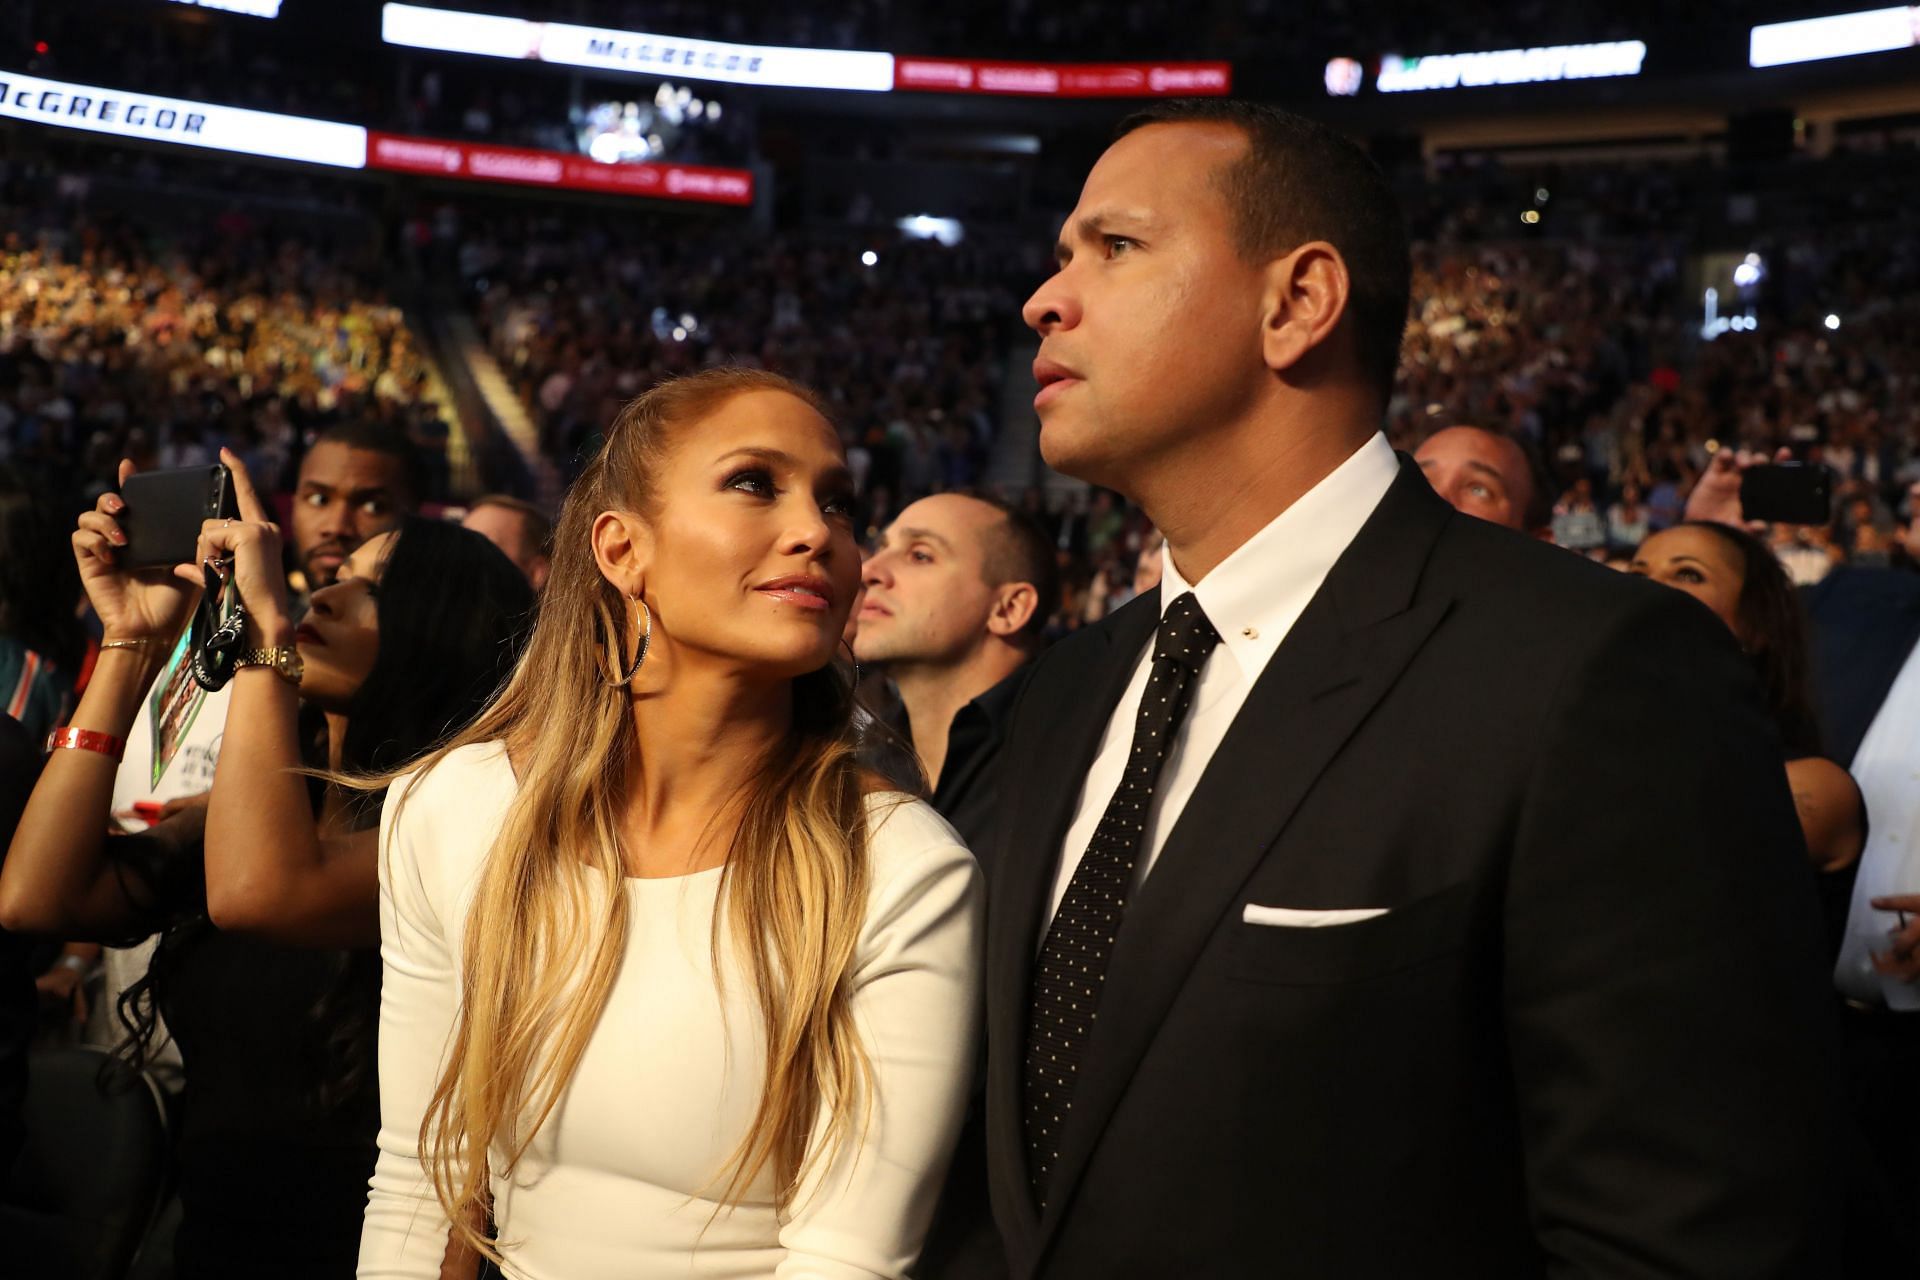 Actress Jennifer Lopez and former MLB player Alex Rodriguez dated from 2017-2021.